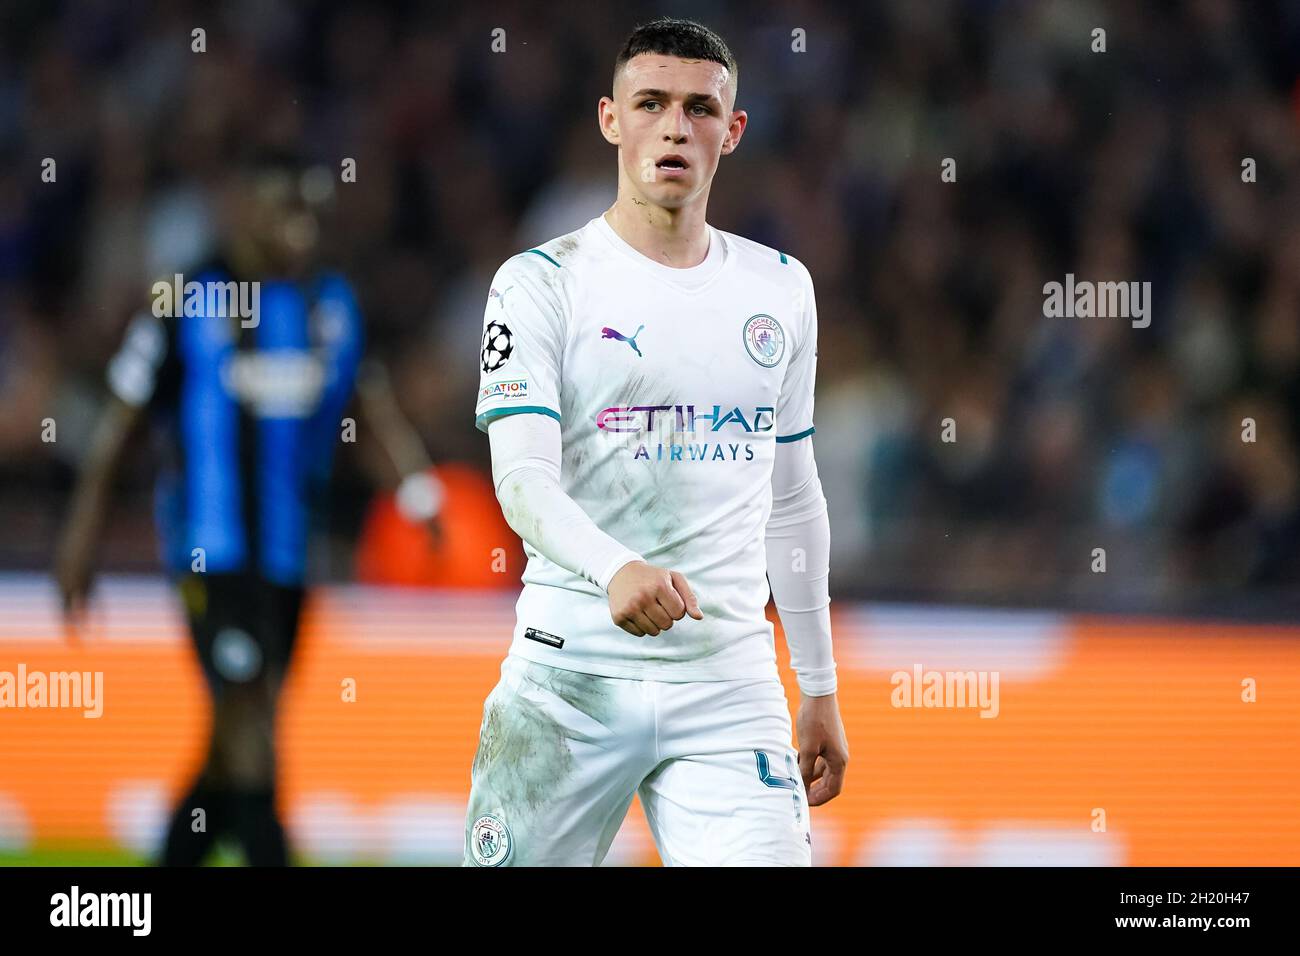 BRUGGE, BELGIUM - OCTOBER 19: Phil Foden of Manchester City during the Group A - UEFA Champions League match between Club Brugge KV and Manchester City at Jan Breydelstadion on October 19, 2021 in Brugge, Belgium (Photo by Jeroen Meuwsen/Orange Pictures) Stock Photo